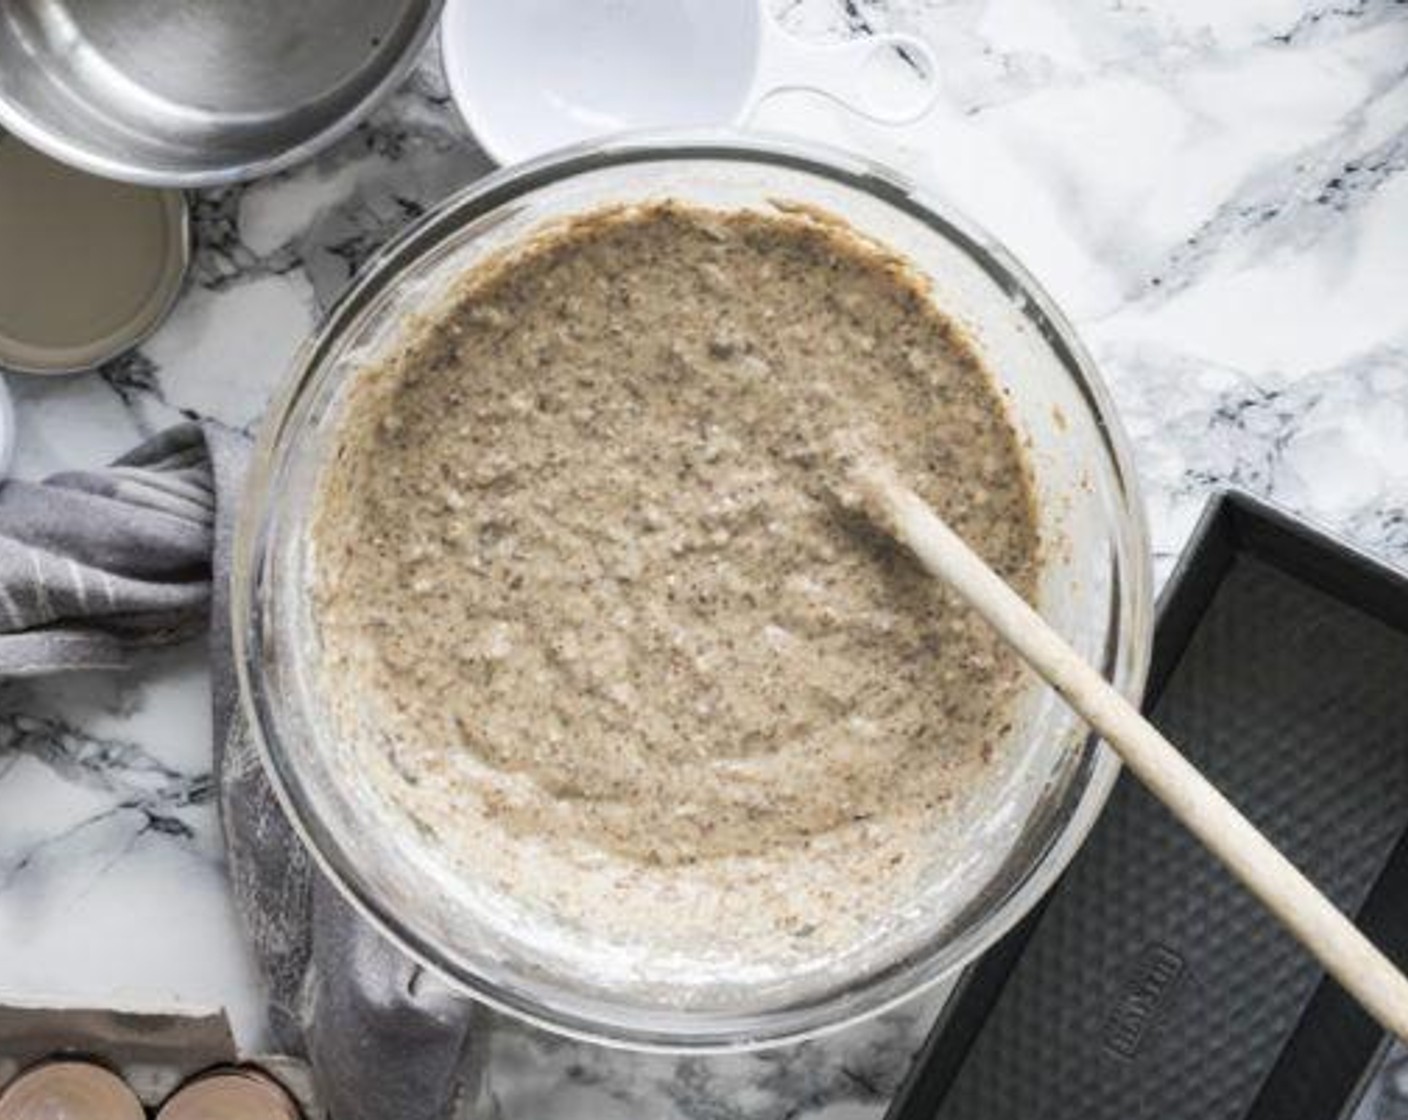 step 4 Add Coconut Butter (1/3 cup), Farmhouse Eggs® Large Brown Eggs (7), and Unsweetened Cashew Milk (2/3 cup) to the almond meal mixture. Stir in Flaxseeds (3 Tbsp), Sunflower Seeds (1/3 cup), and Sesame Seeds (1 Tbsp) until combined, being careful not to over-mix.